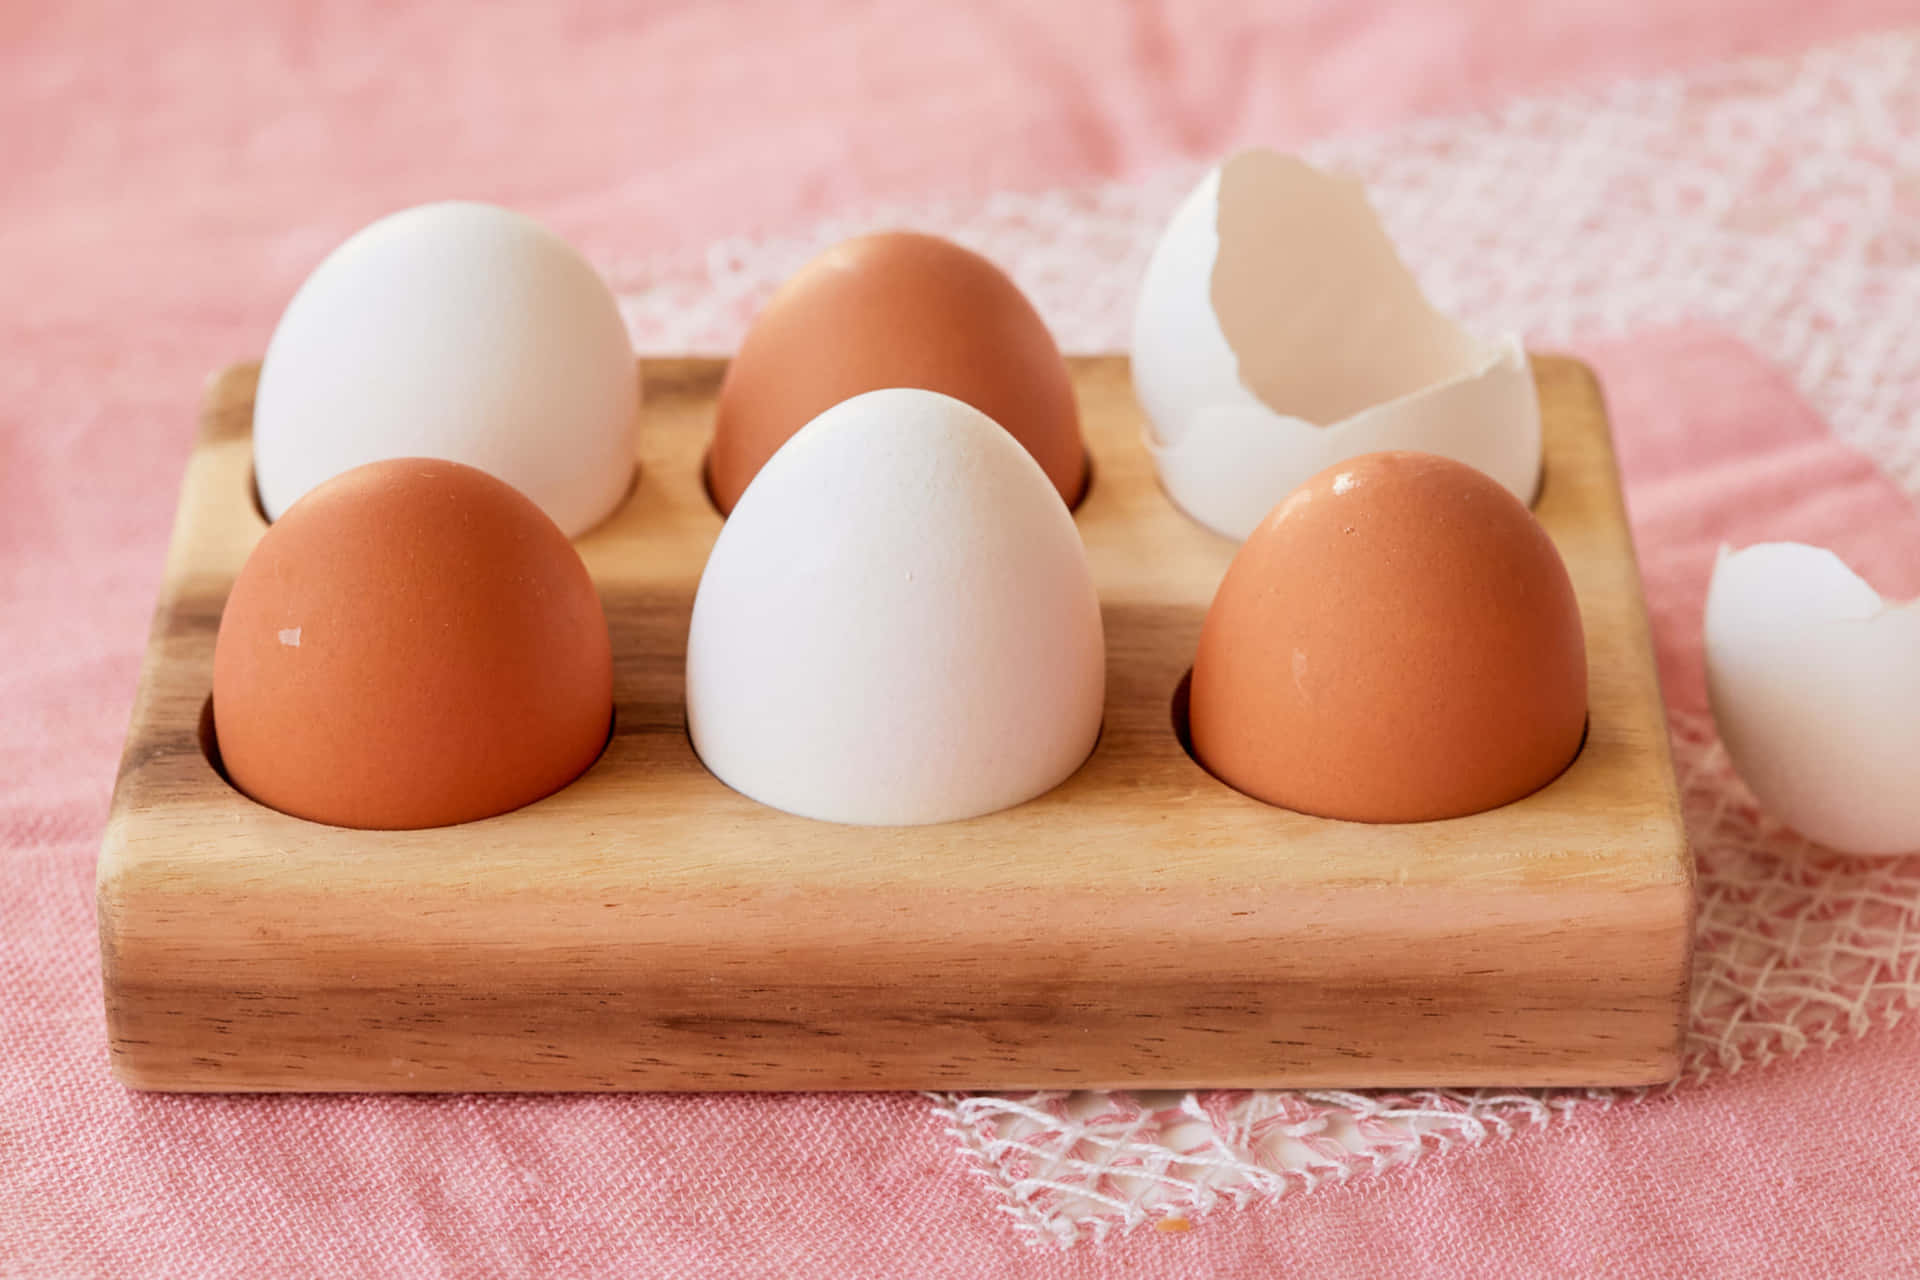 A Wooden Tray With Five Eggs In It